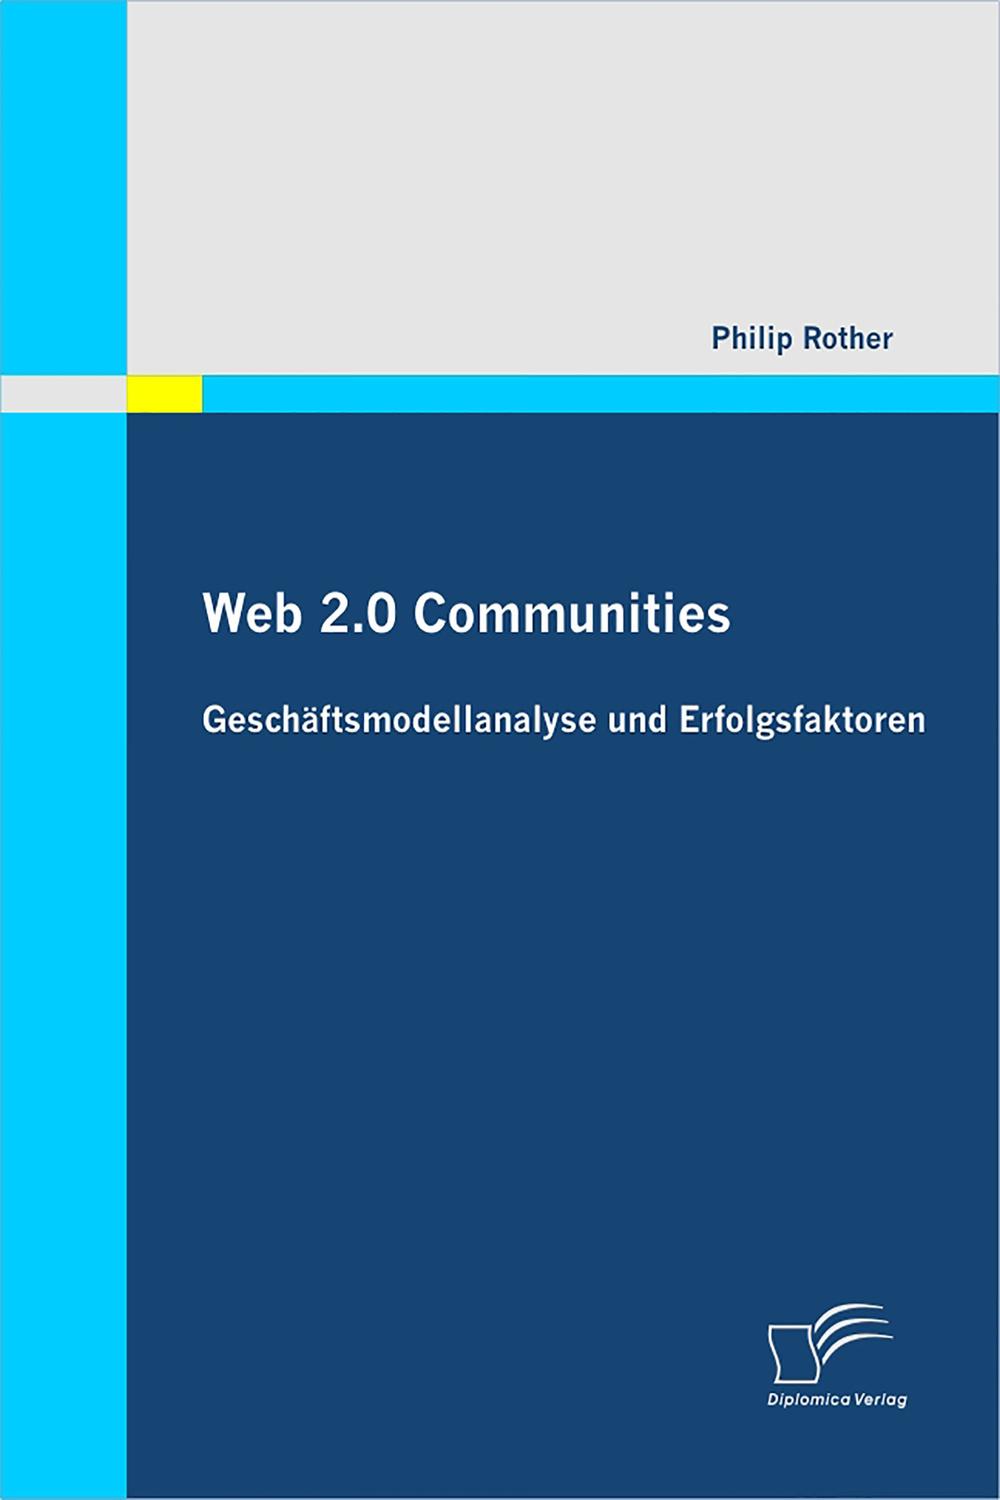 Web 2.0 Communities - Philip Rother